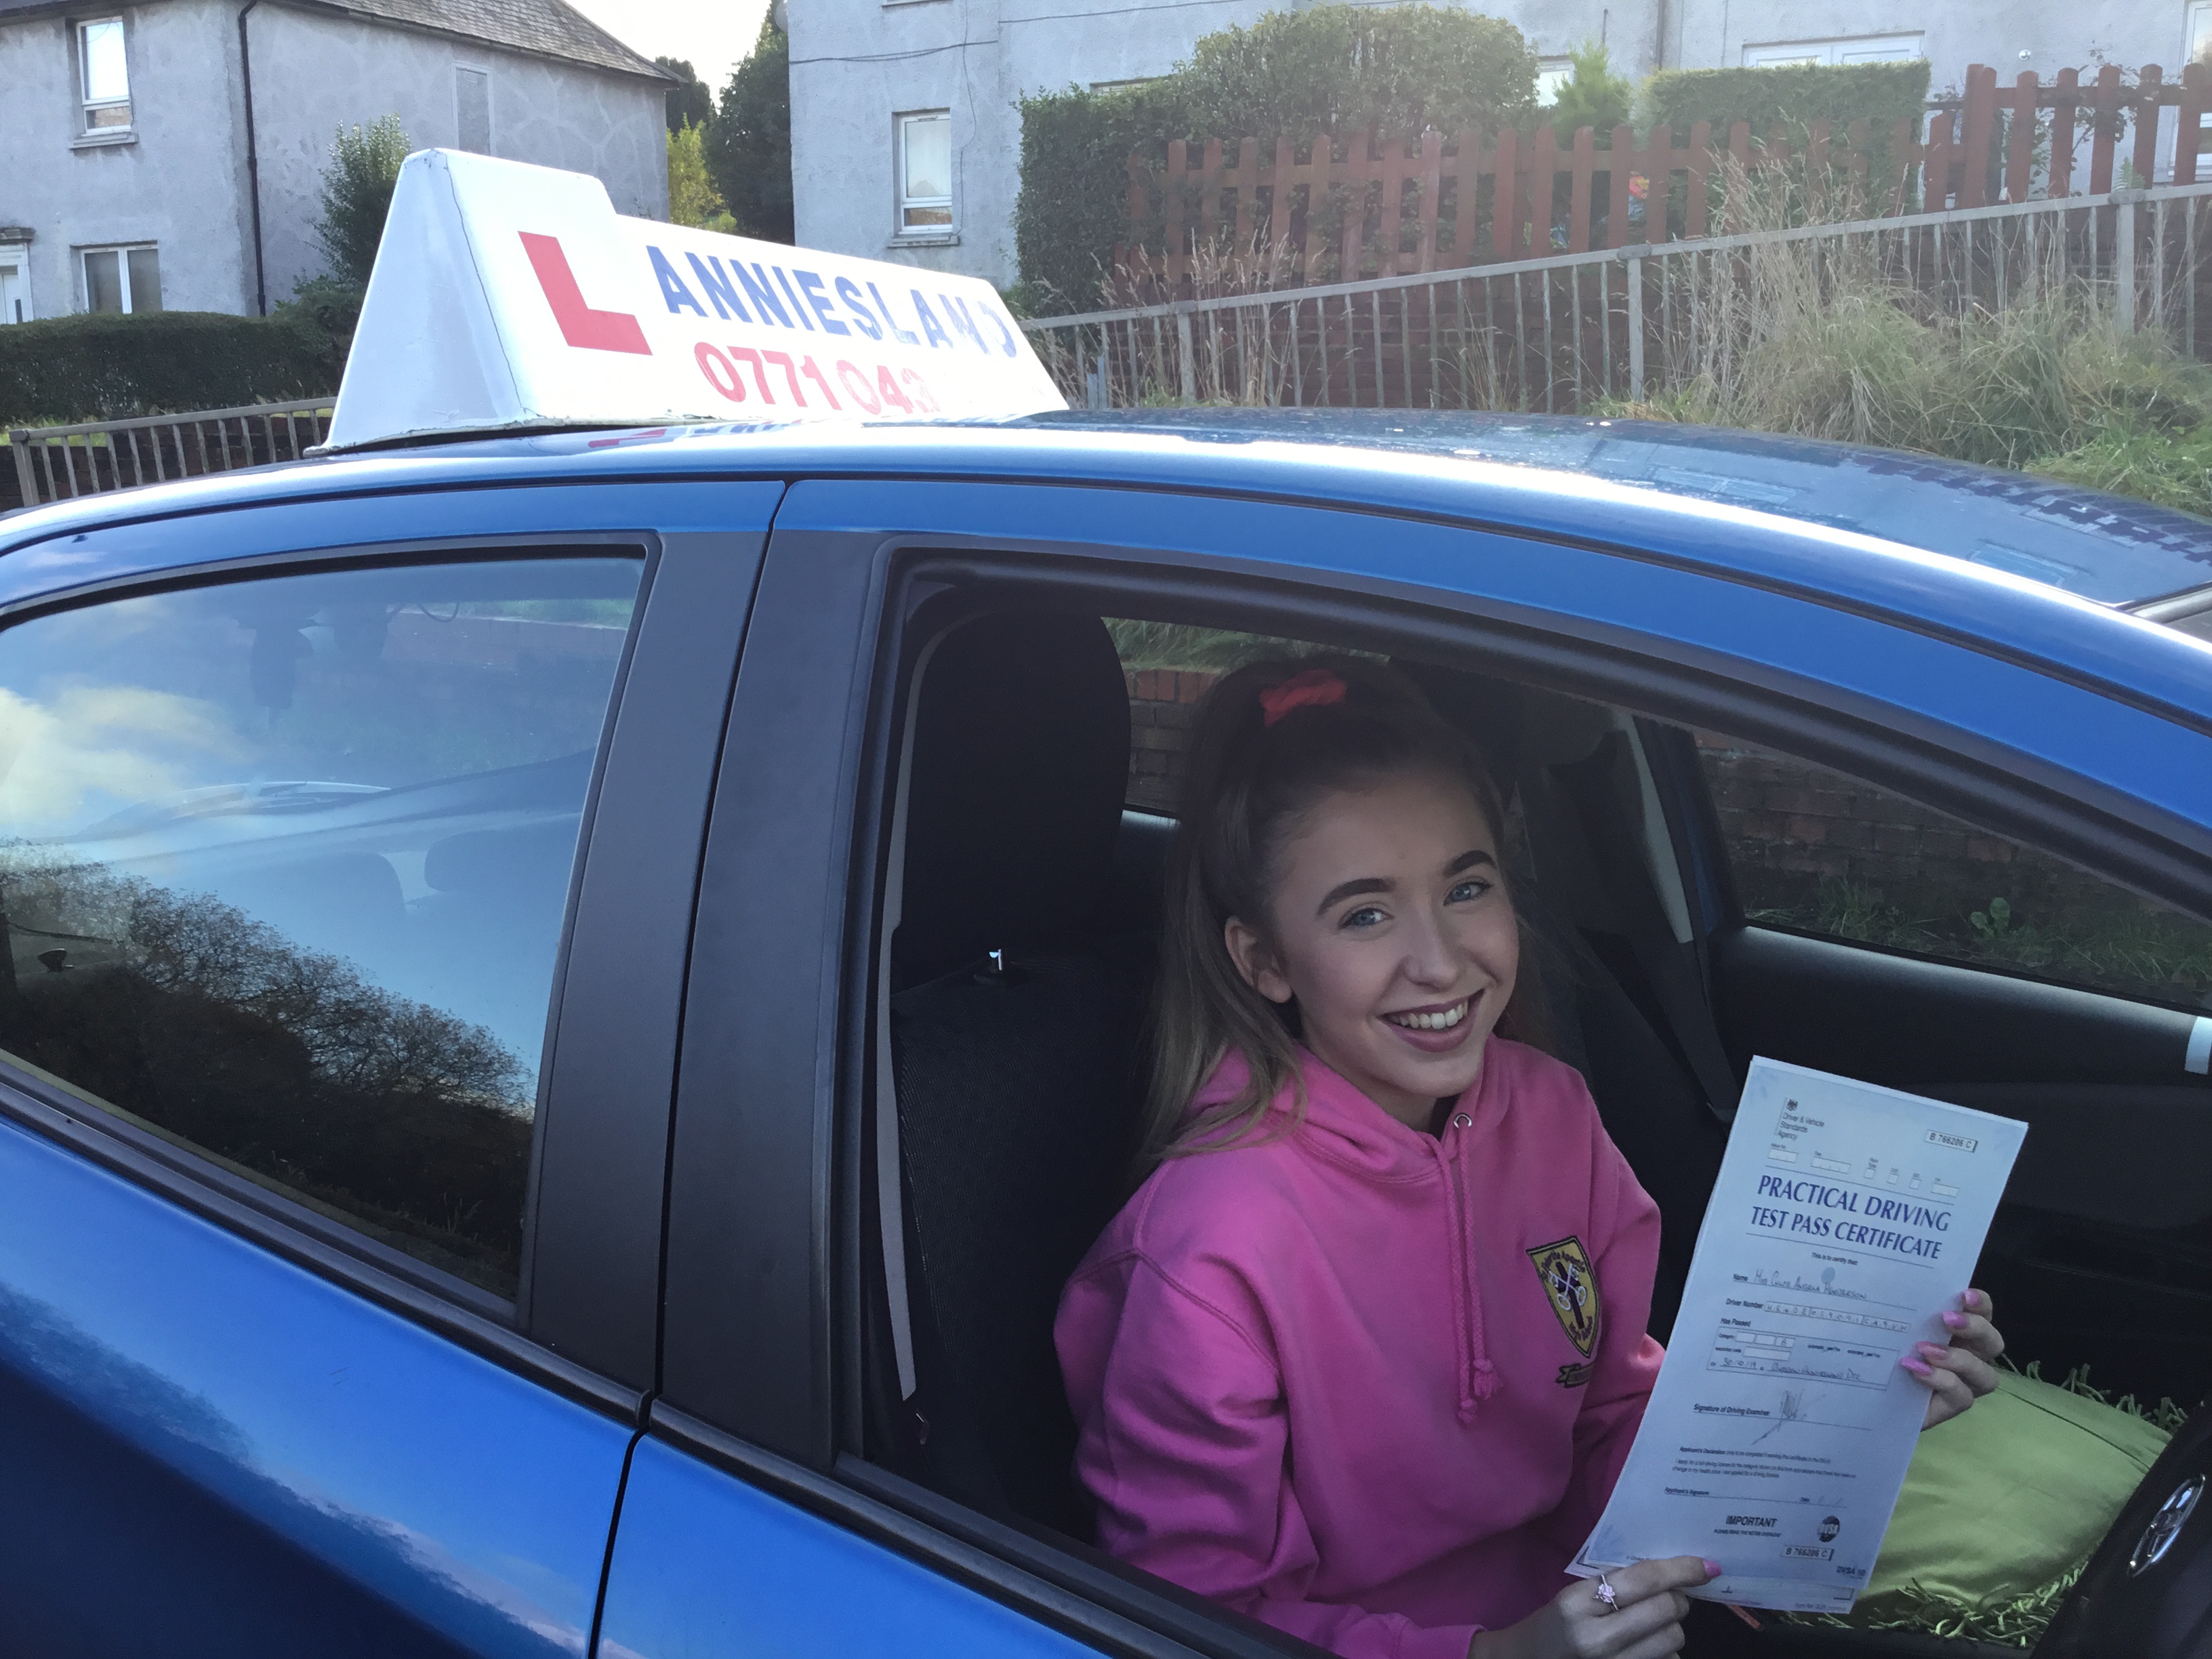 Chloe Henderson successfully passed their driving test with Anniesland Driving School